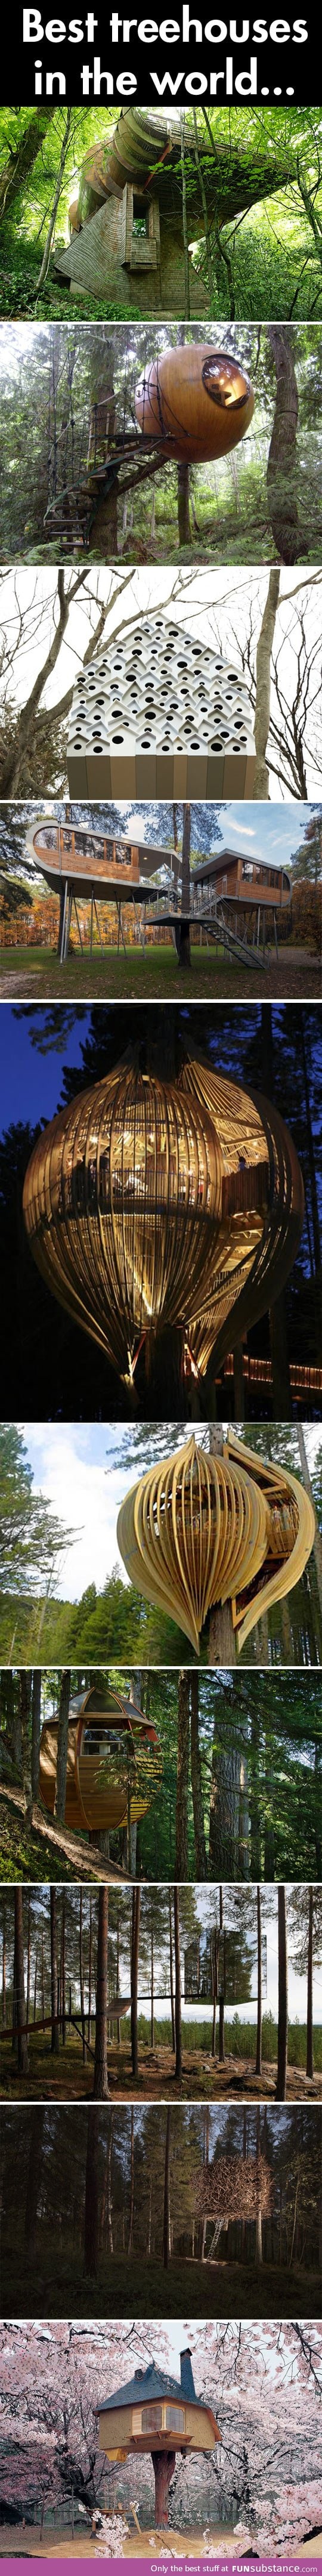 Tree houses of the world